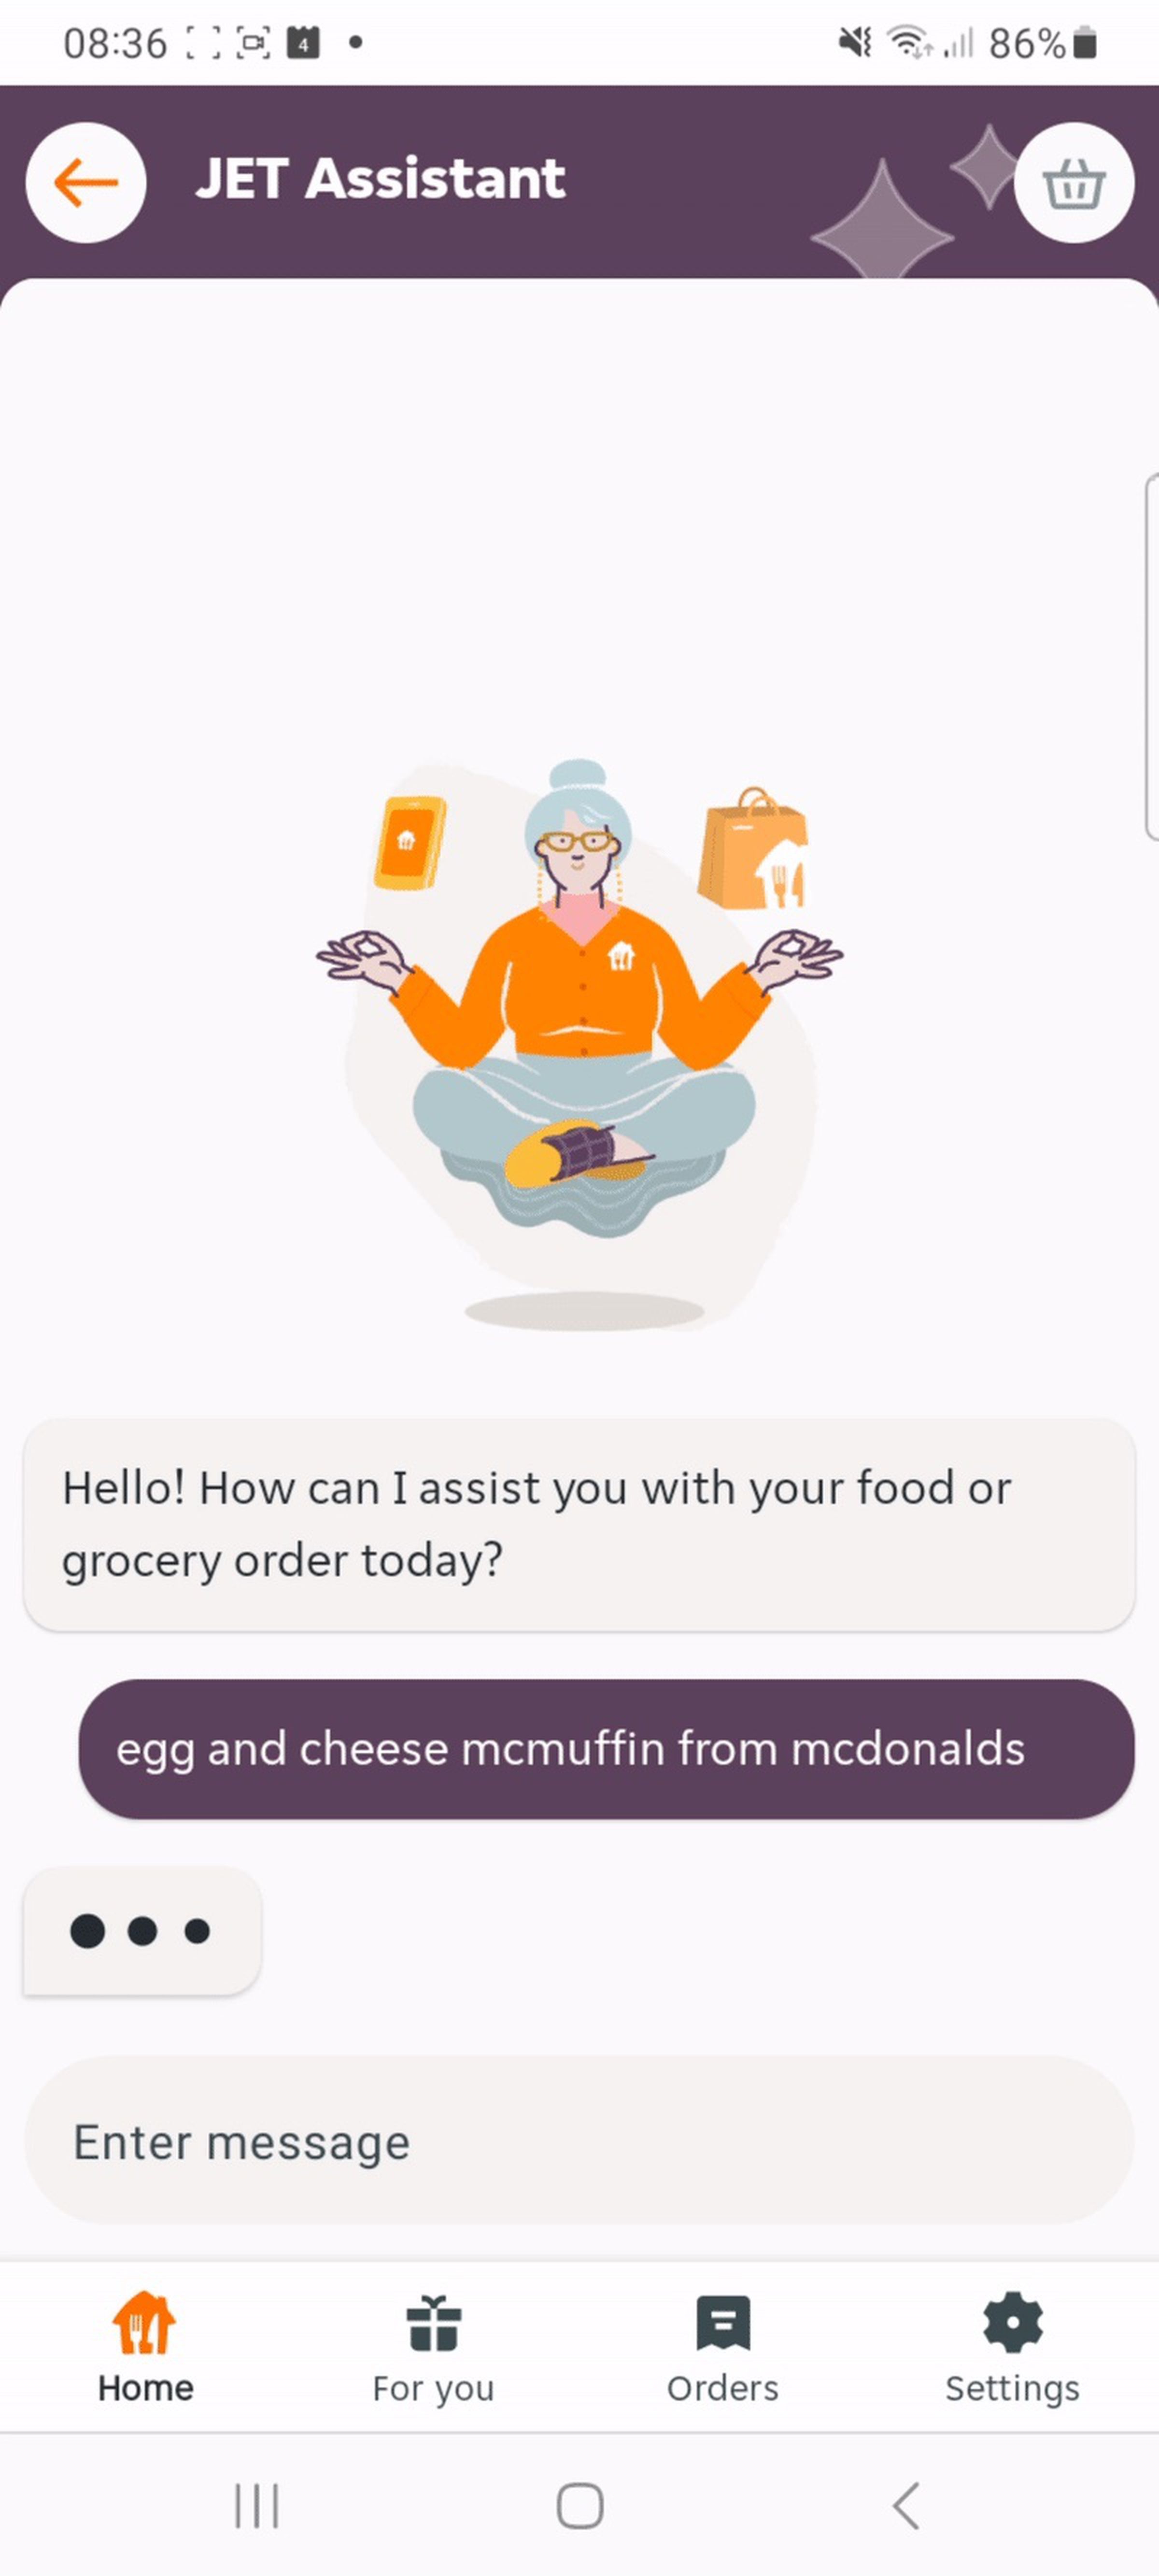 User responds “egg and cheese mcmuffin from mcdonalds”